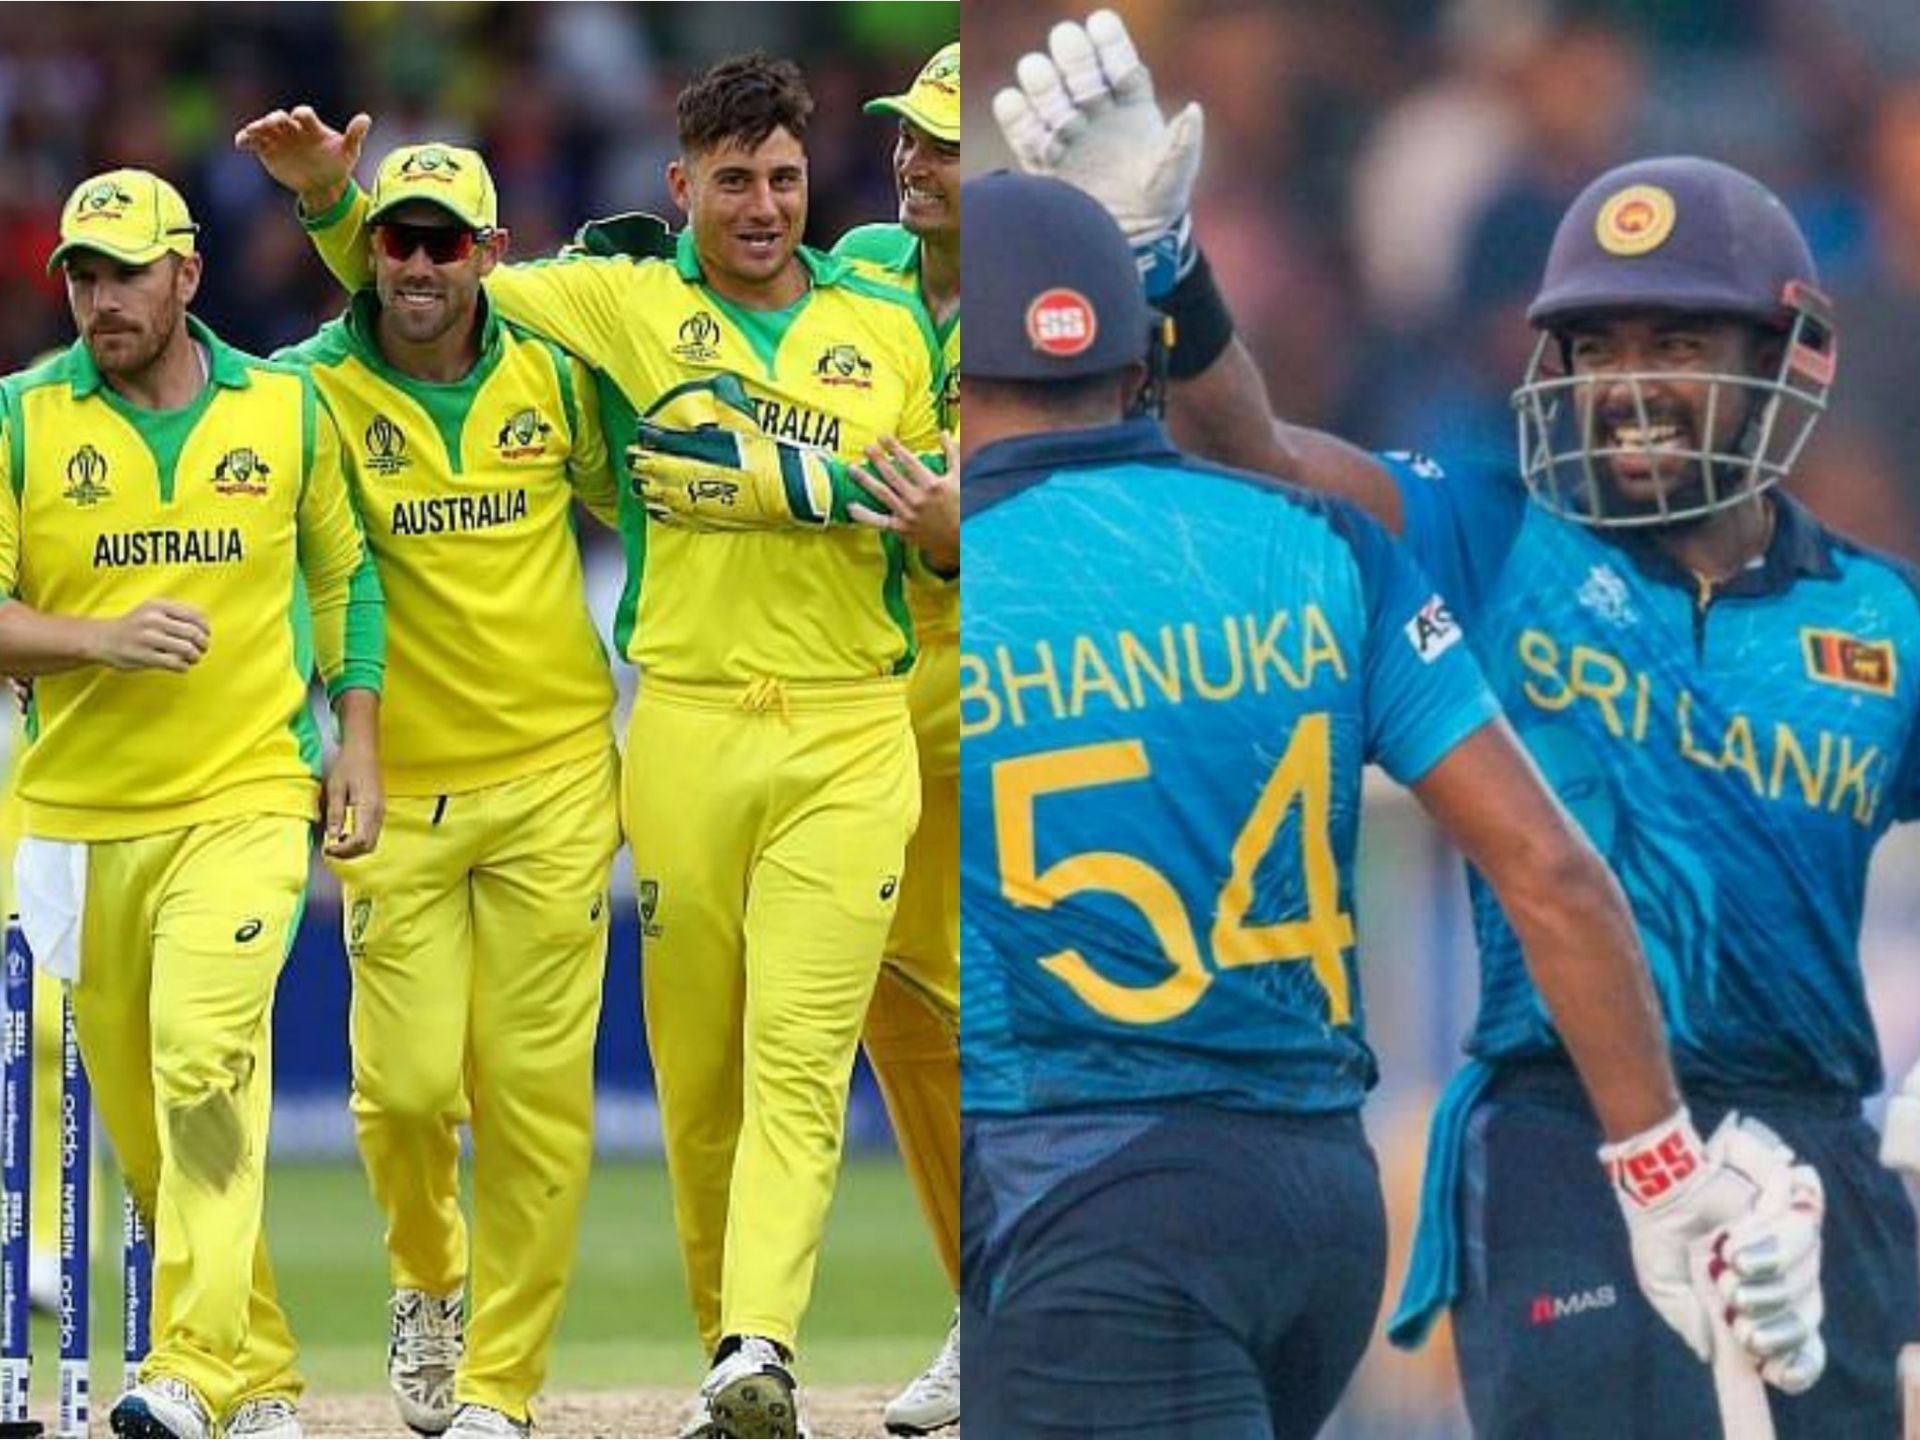 Australia (L) and Sri Lanka will lock horns in Match 22 of the T20 World Cup 2021